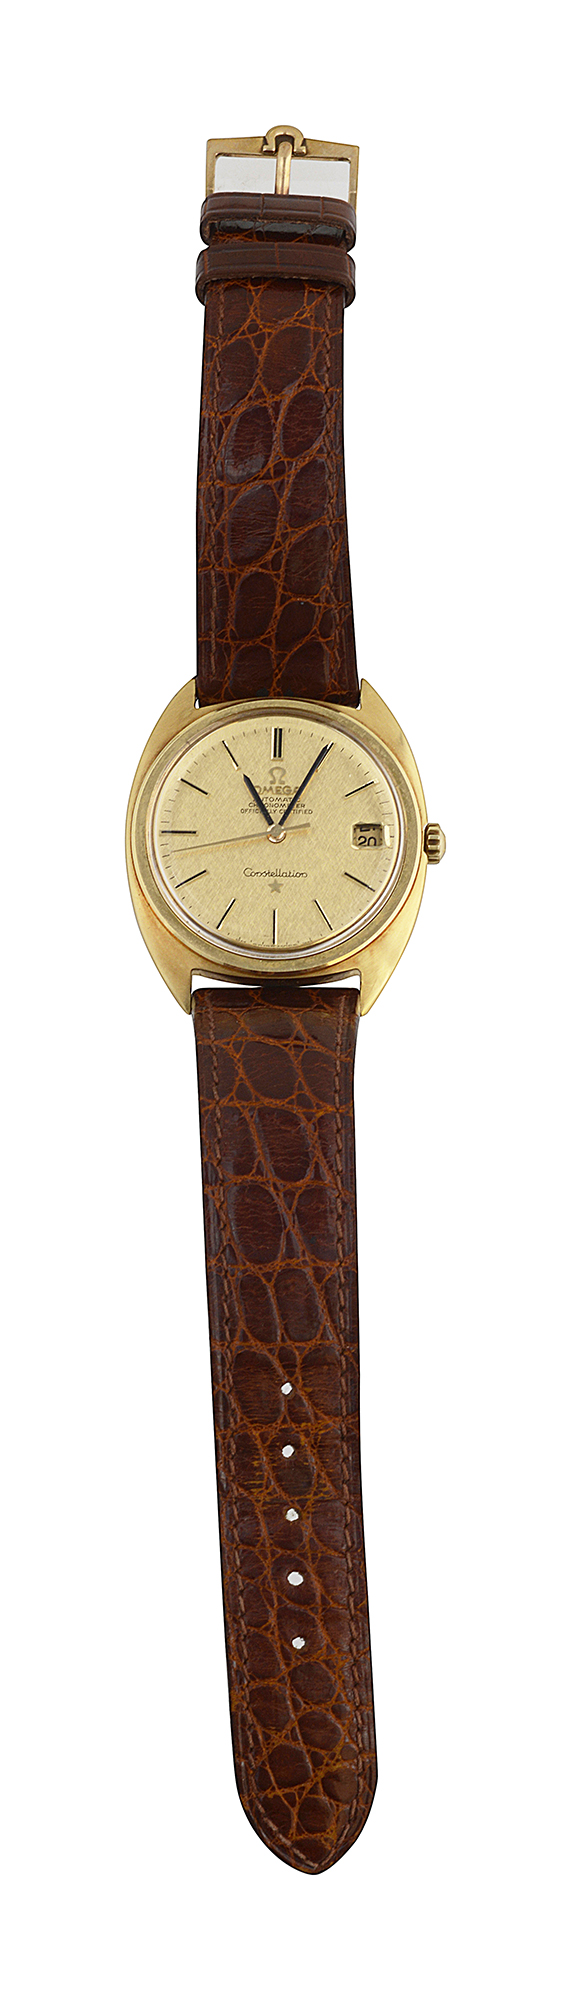 An 18k Omega automatic chronometer Constellation wristwatch - Image 2 of 6